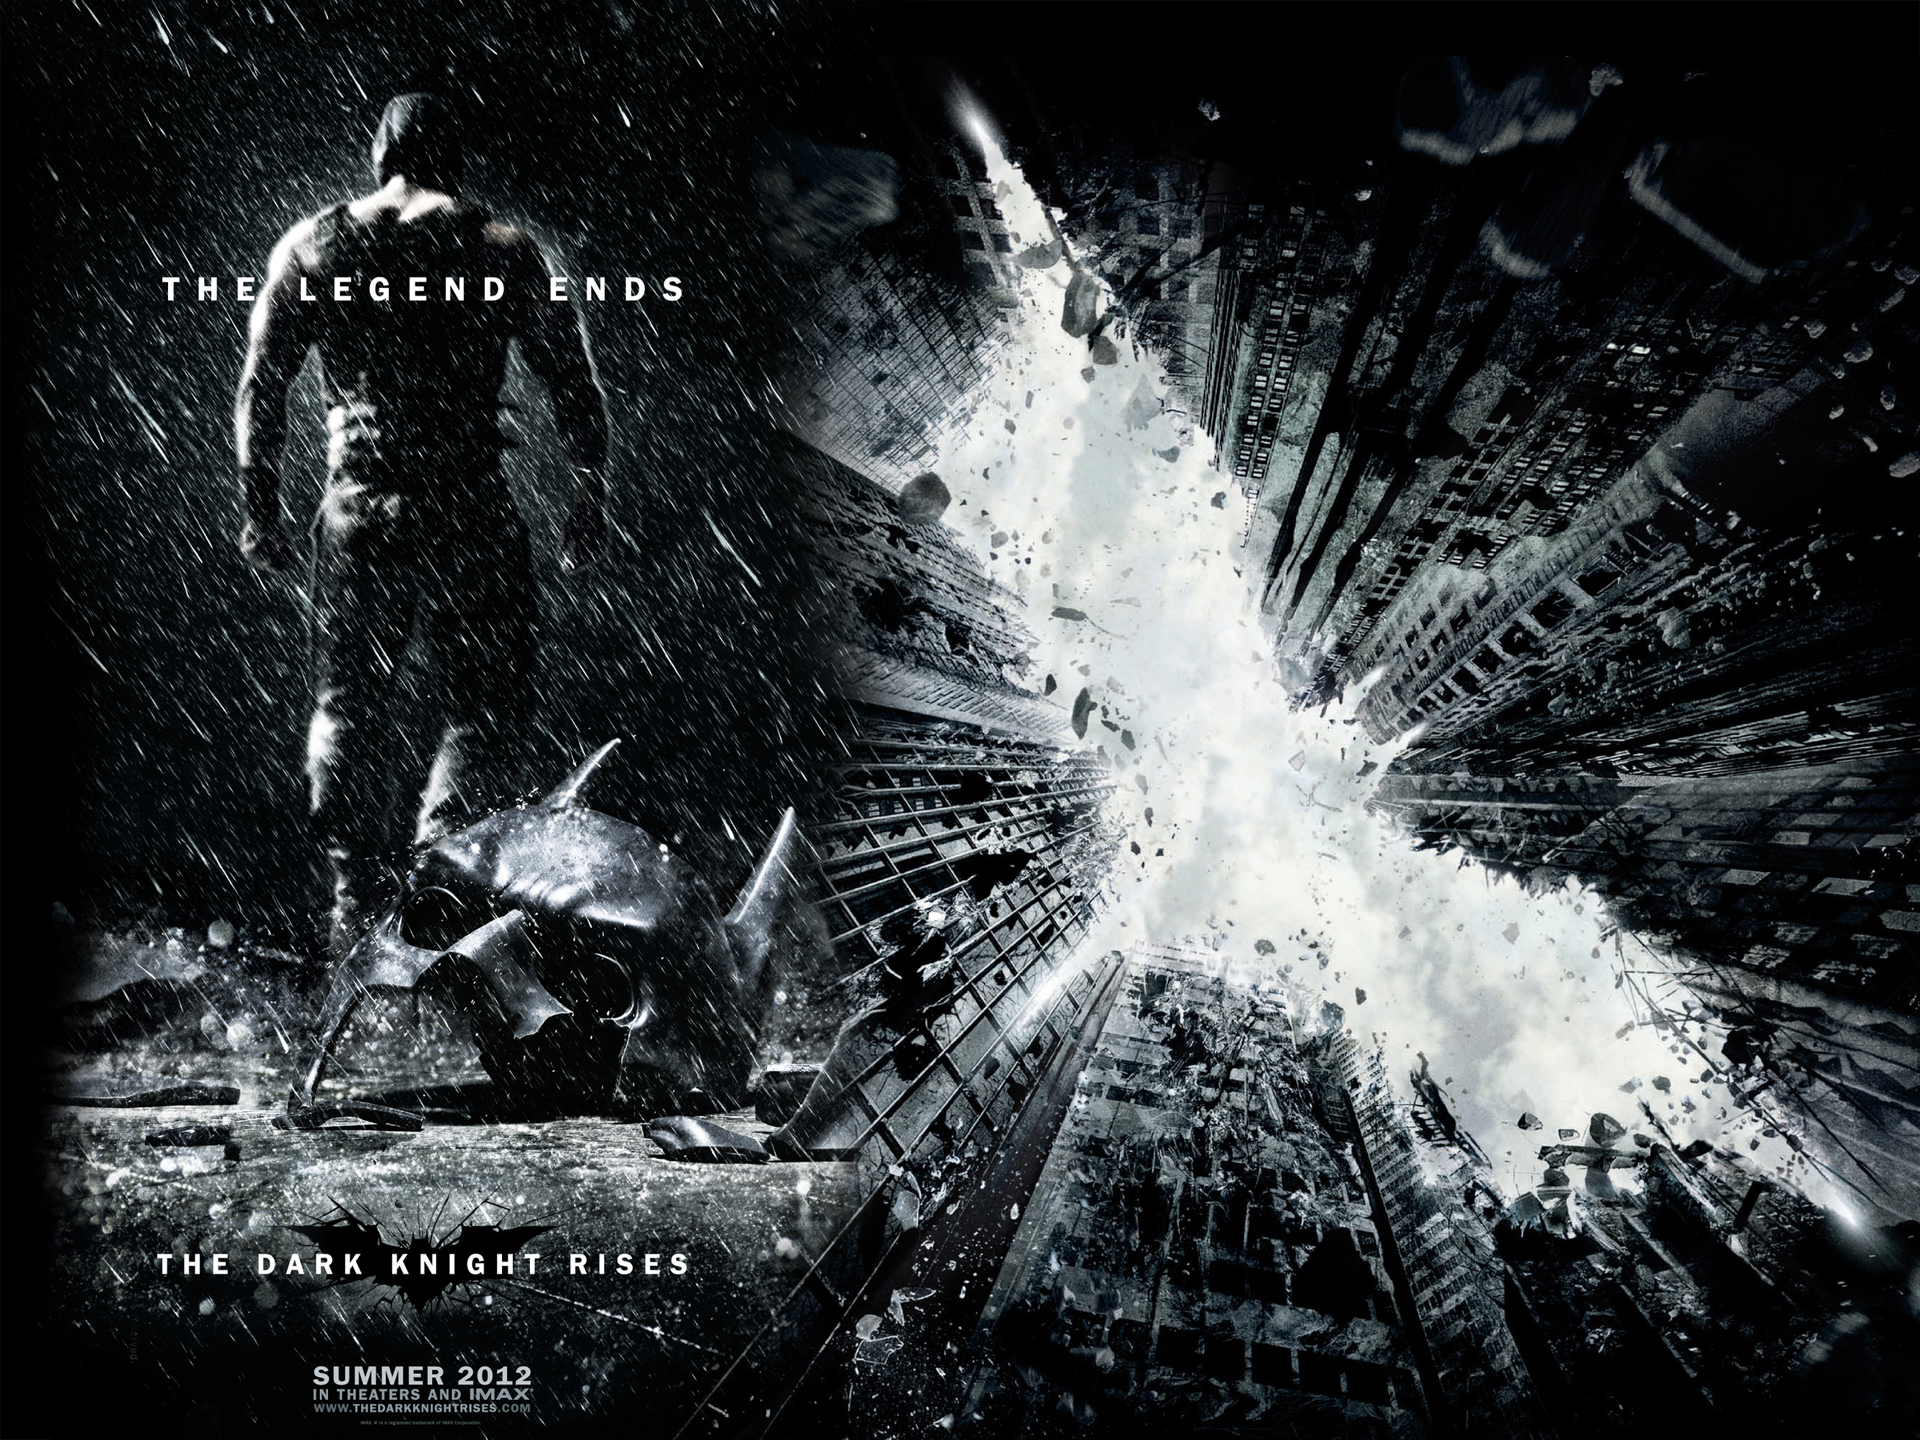 The Dark Knight Rises Two Exclusive Wallpaper And New Poster